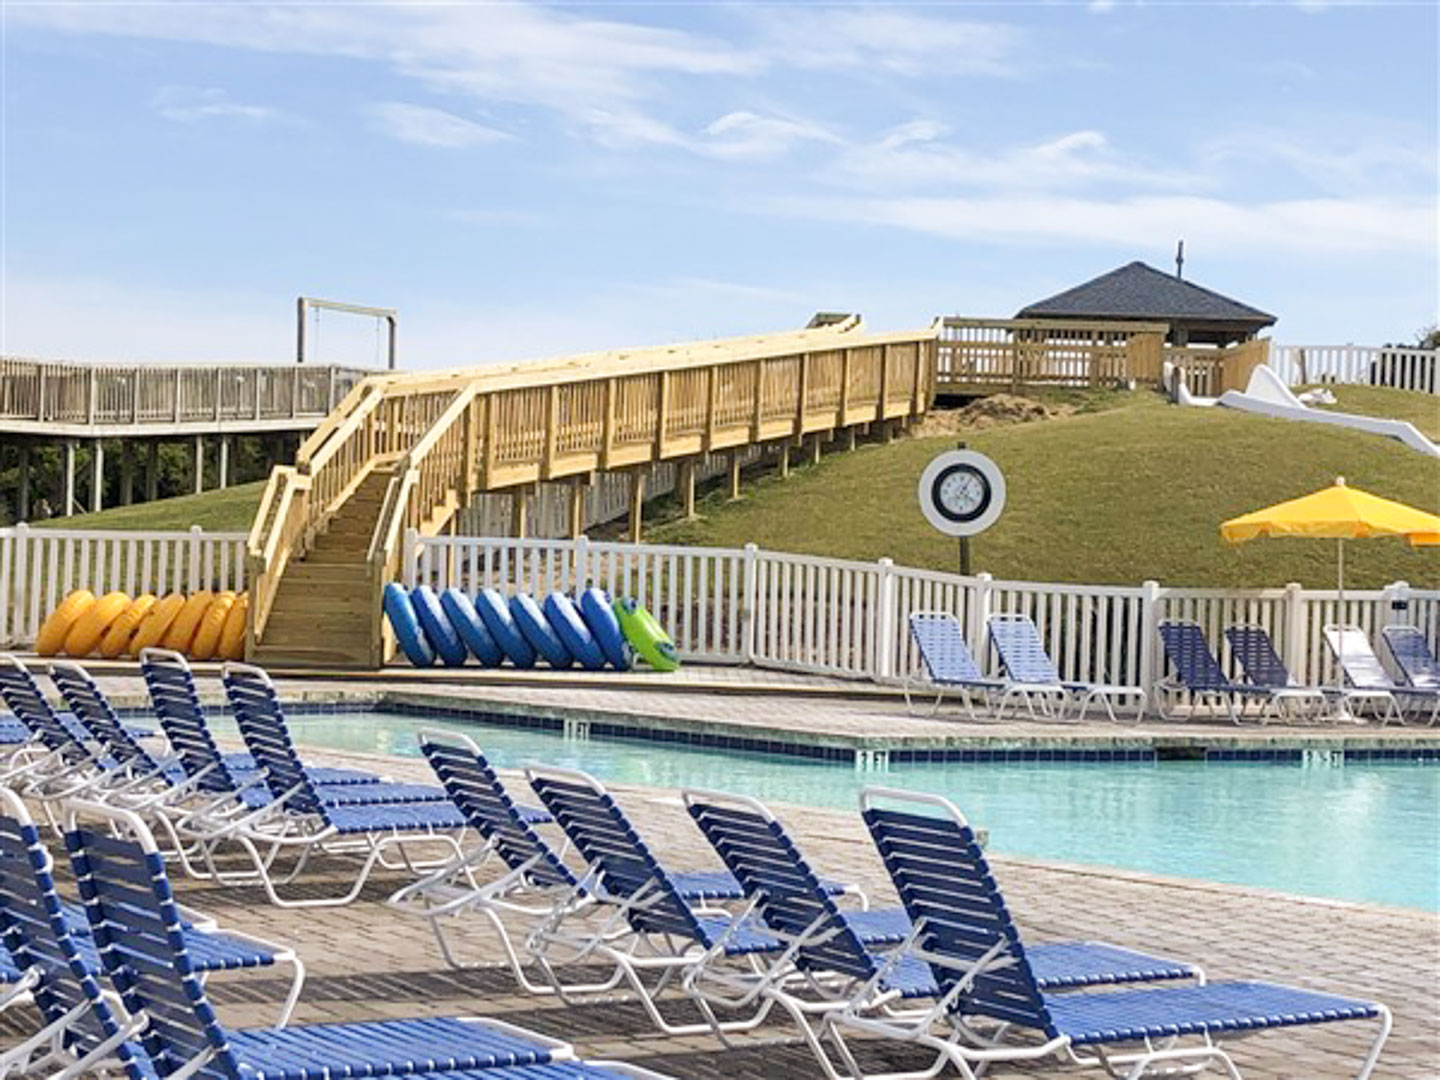 A spacious outdoor swimming pool with a water slide at VRI's A Place at the Beach, Atlantic Beach, NC.